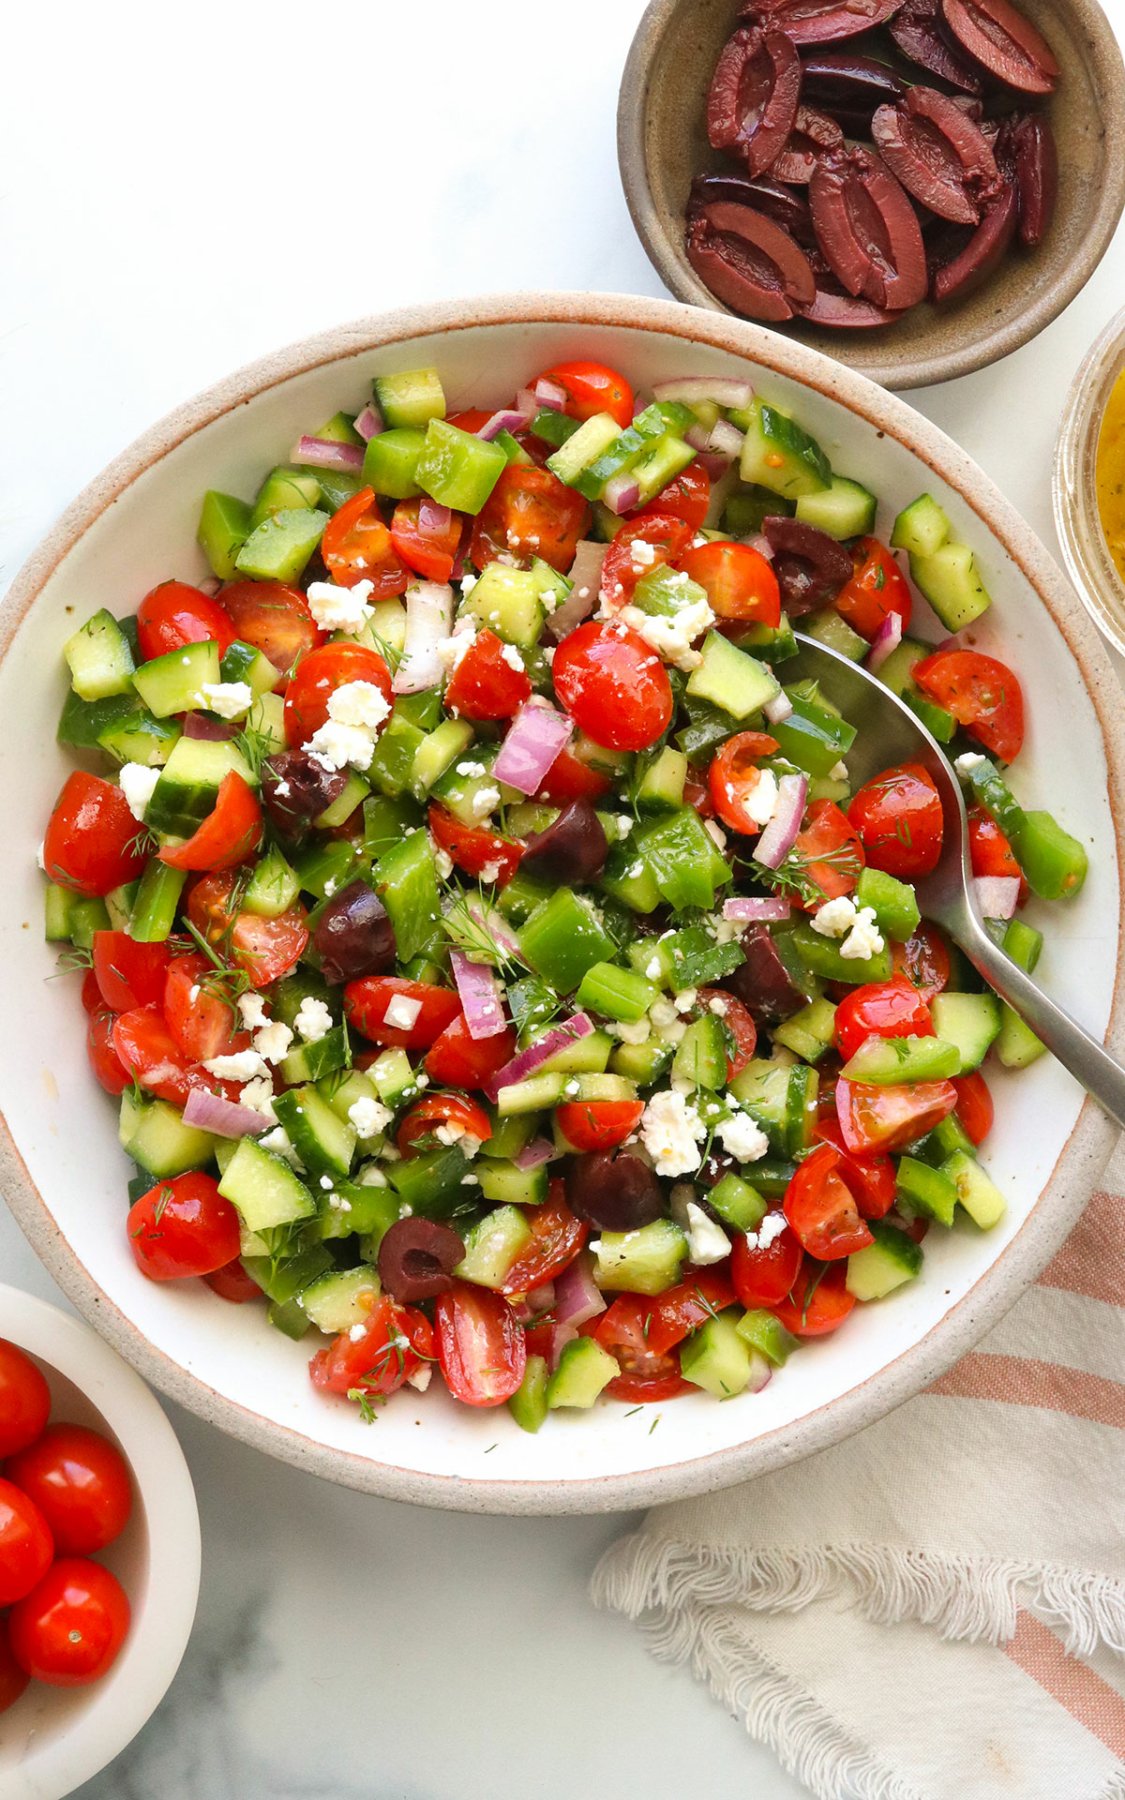 Greek salad topped with feta cheese and stirred with a spoon.